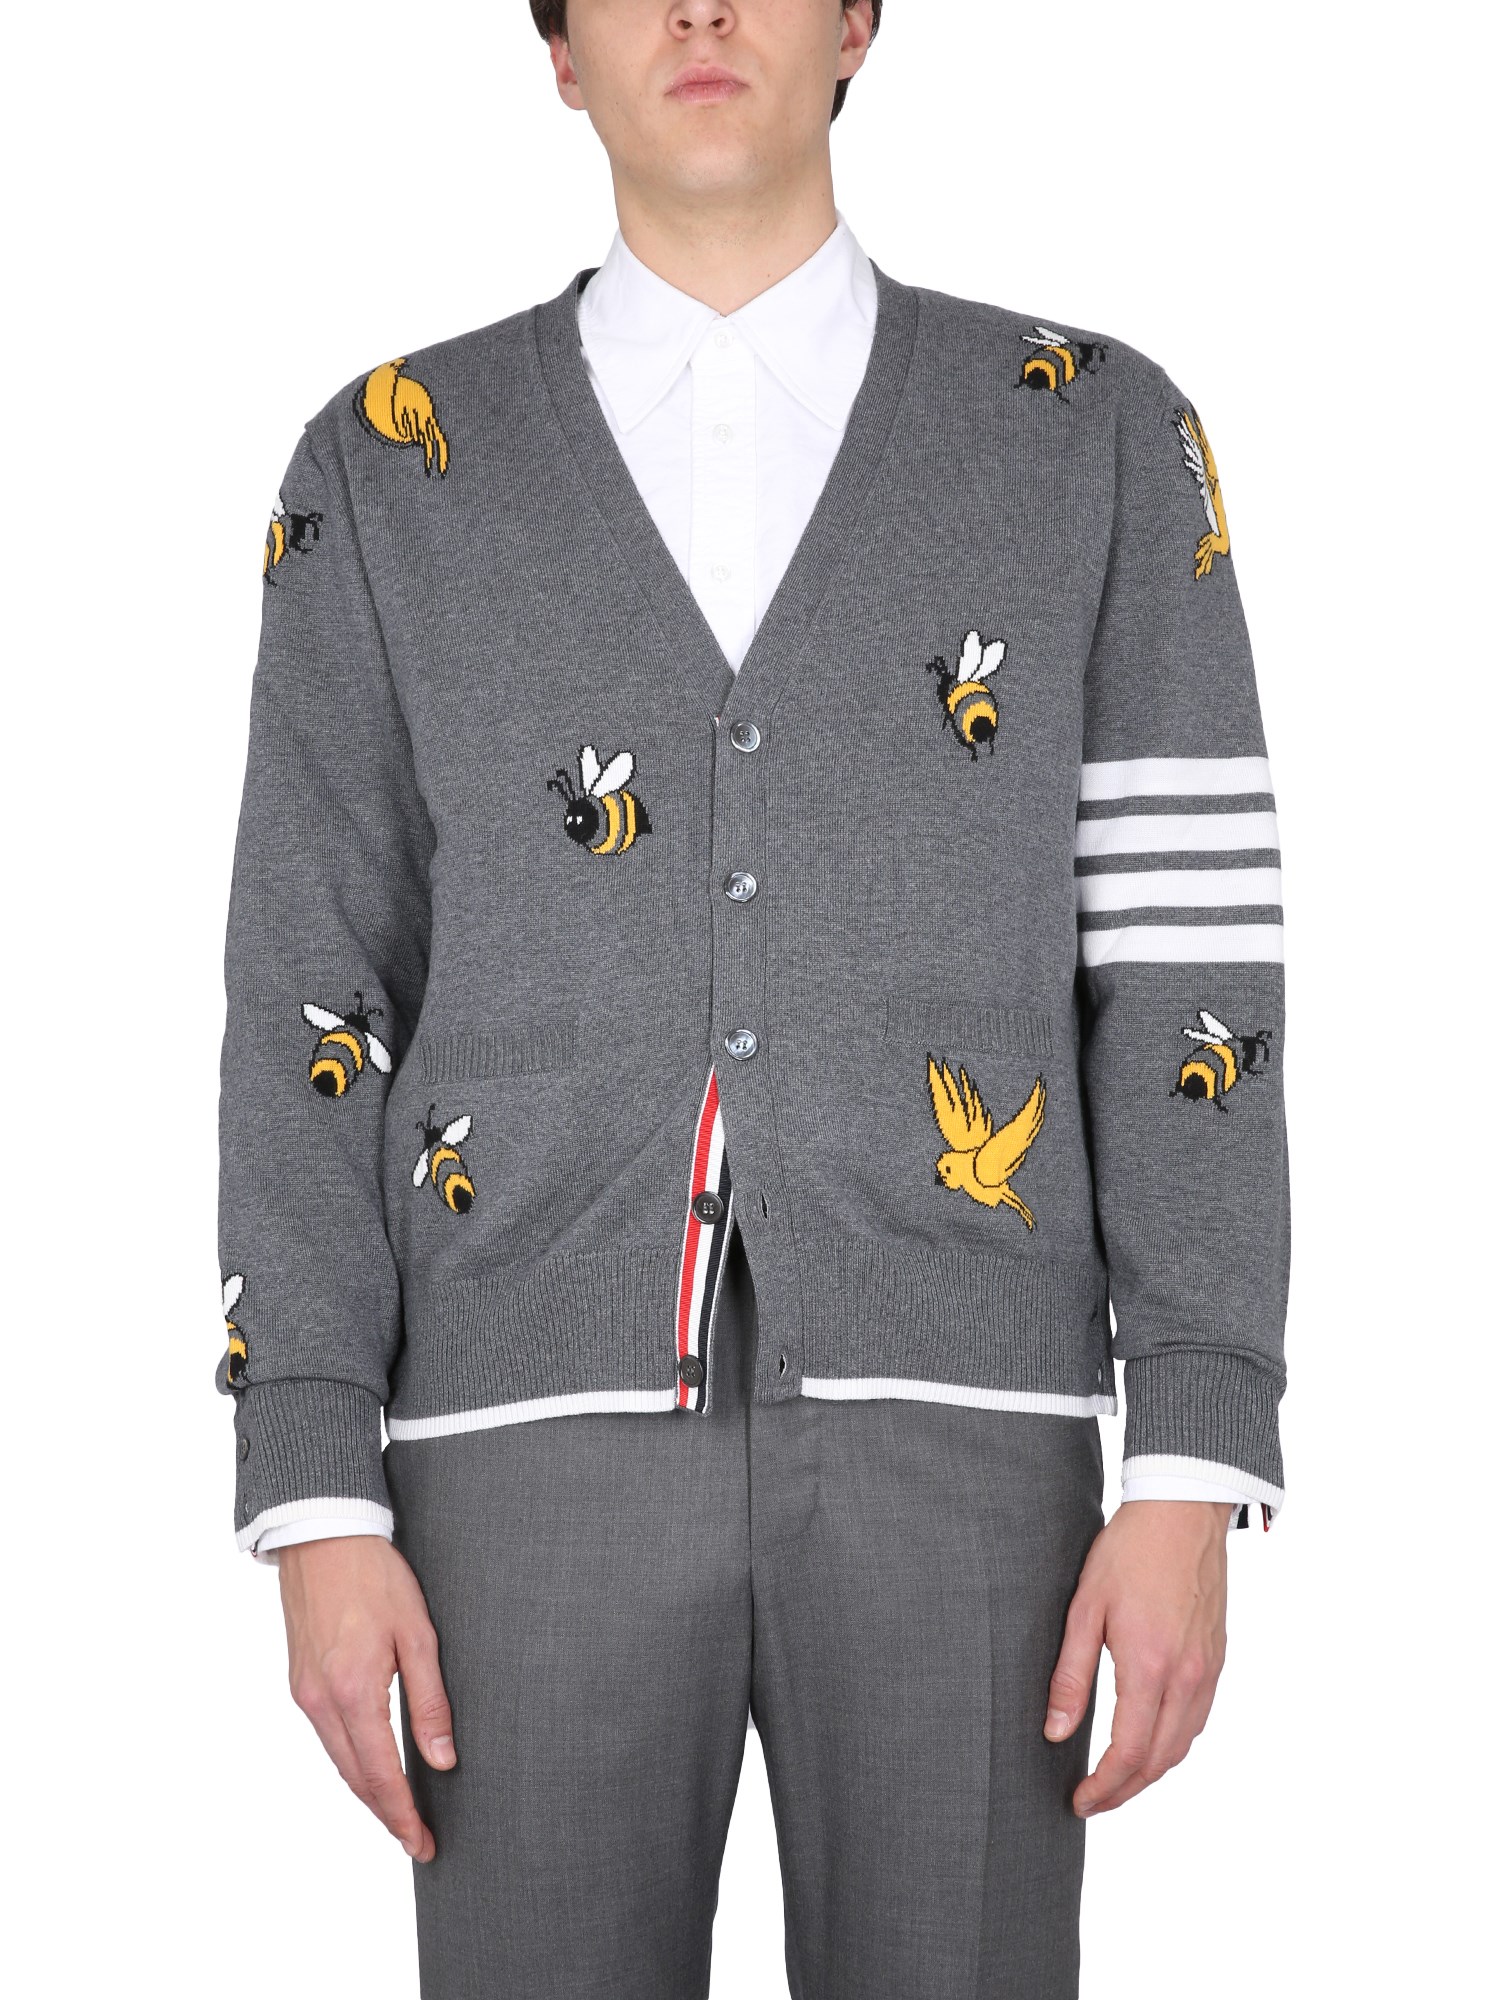 thom browne cardigan with birds and bees inlays